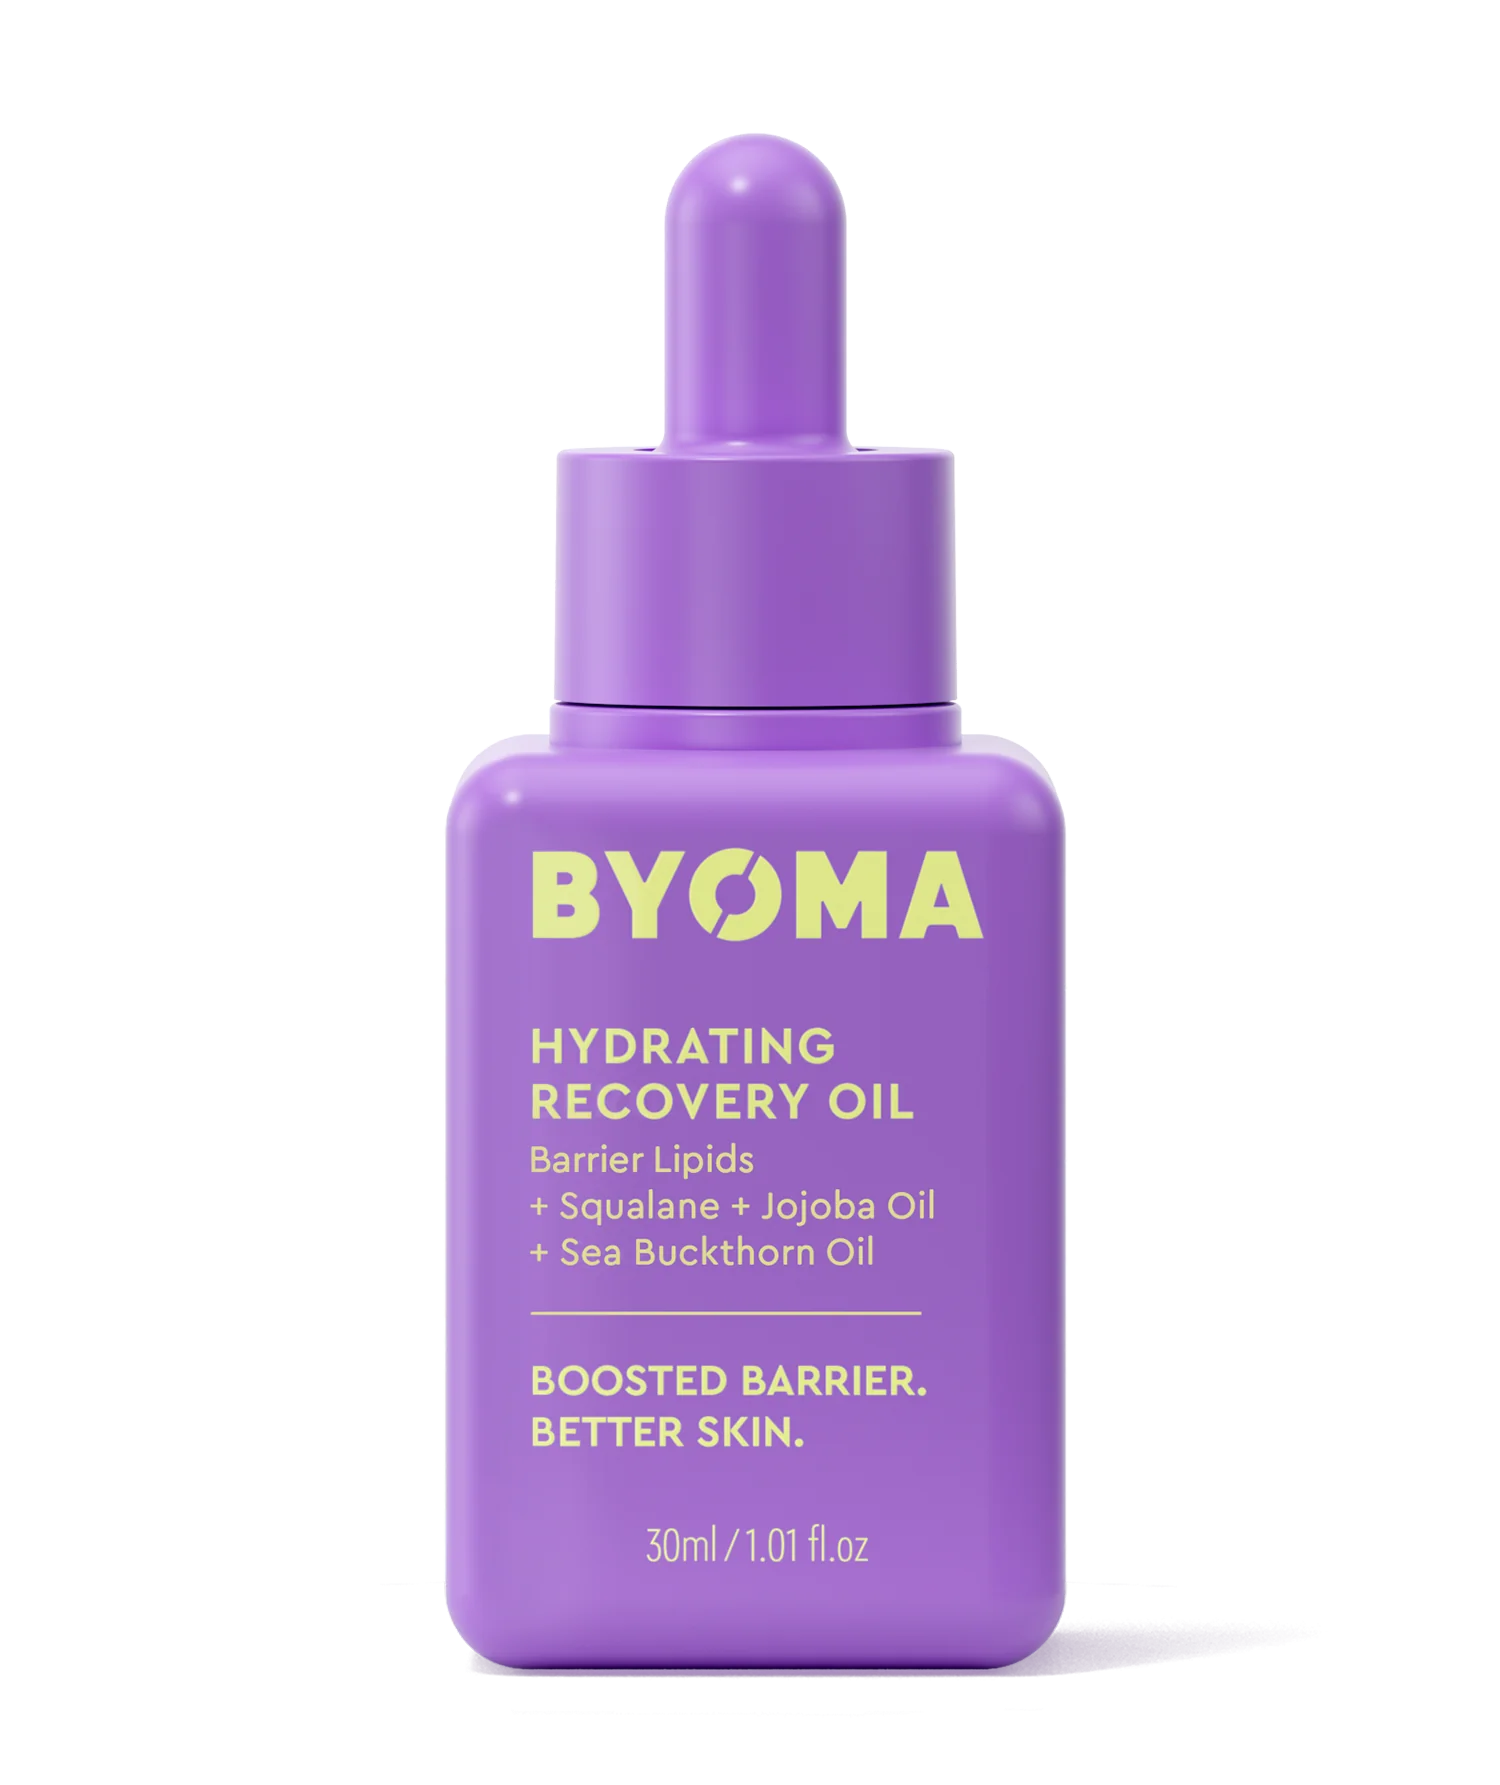 HYDRATING RECOVERY OIL